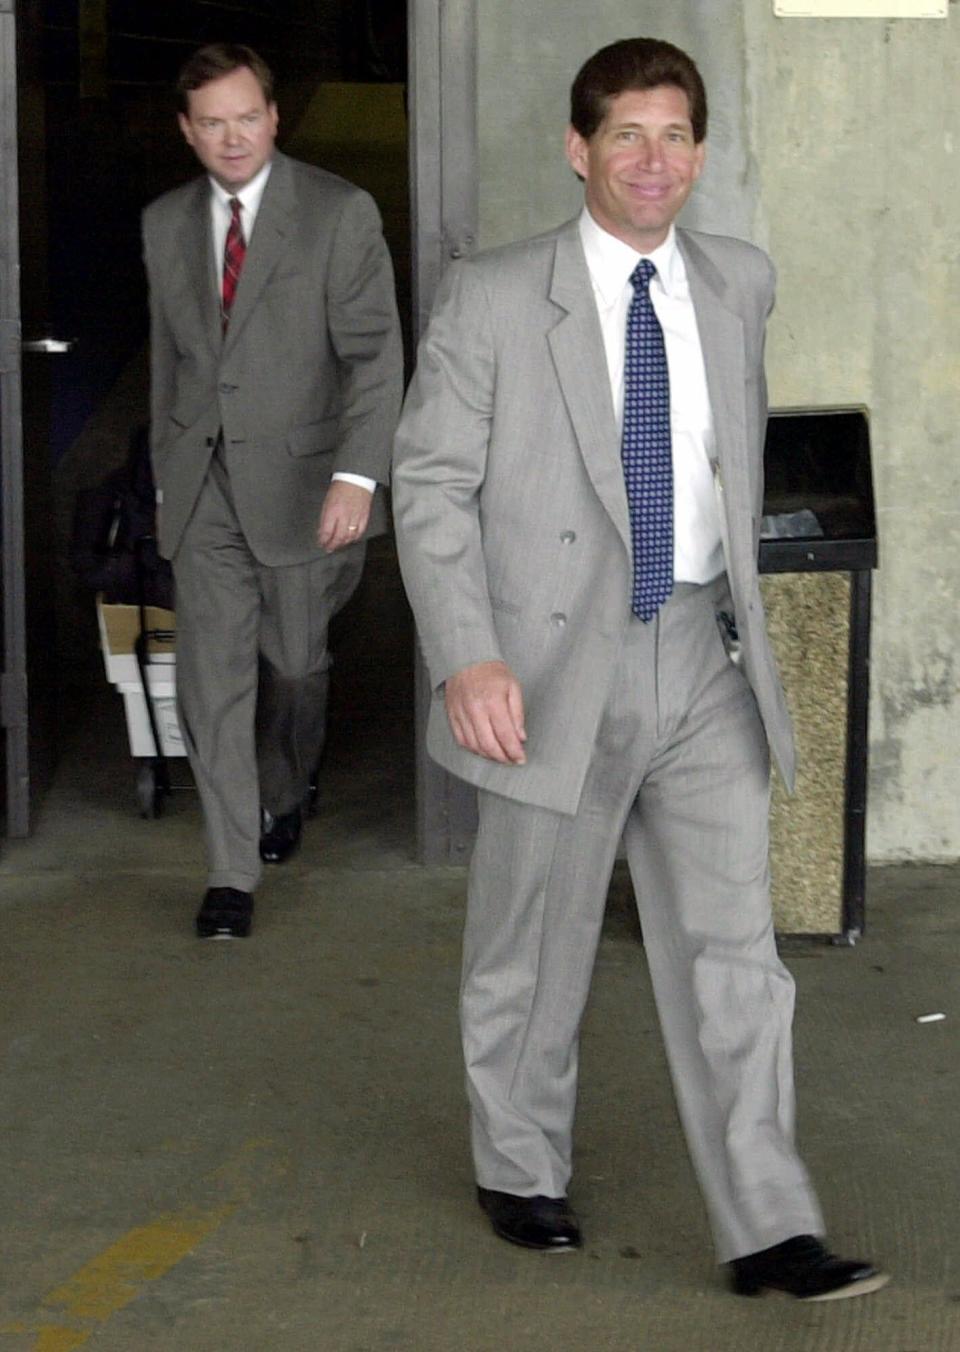 Michael DiLeonardo, right, accused of being a member of the Gambino crime family, right, followed by his attorney Craig Gillen, left, leave the federal building in Atlanta, Wednesday, Aug. 1, 2001. With no explanation from defense attorneys and prosecutors, testimony in the Gold Club trial was abruptly canceled Wednesday, and the proceedings were put on hold. (AP Photo/Gregory Smith)